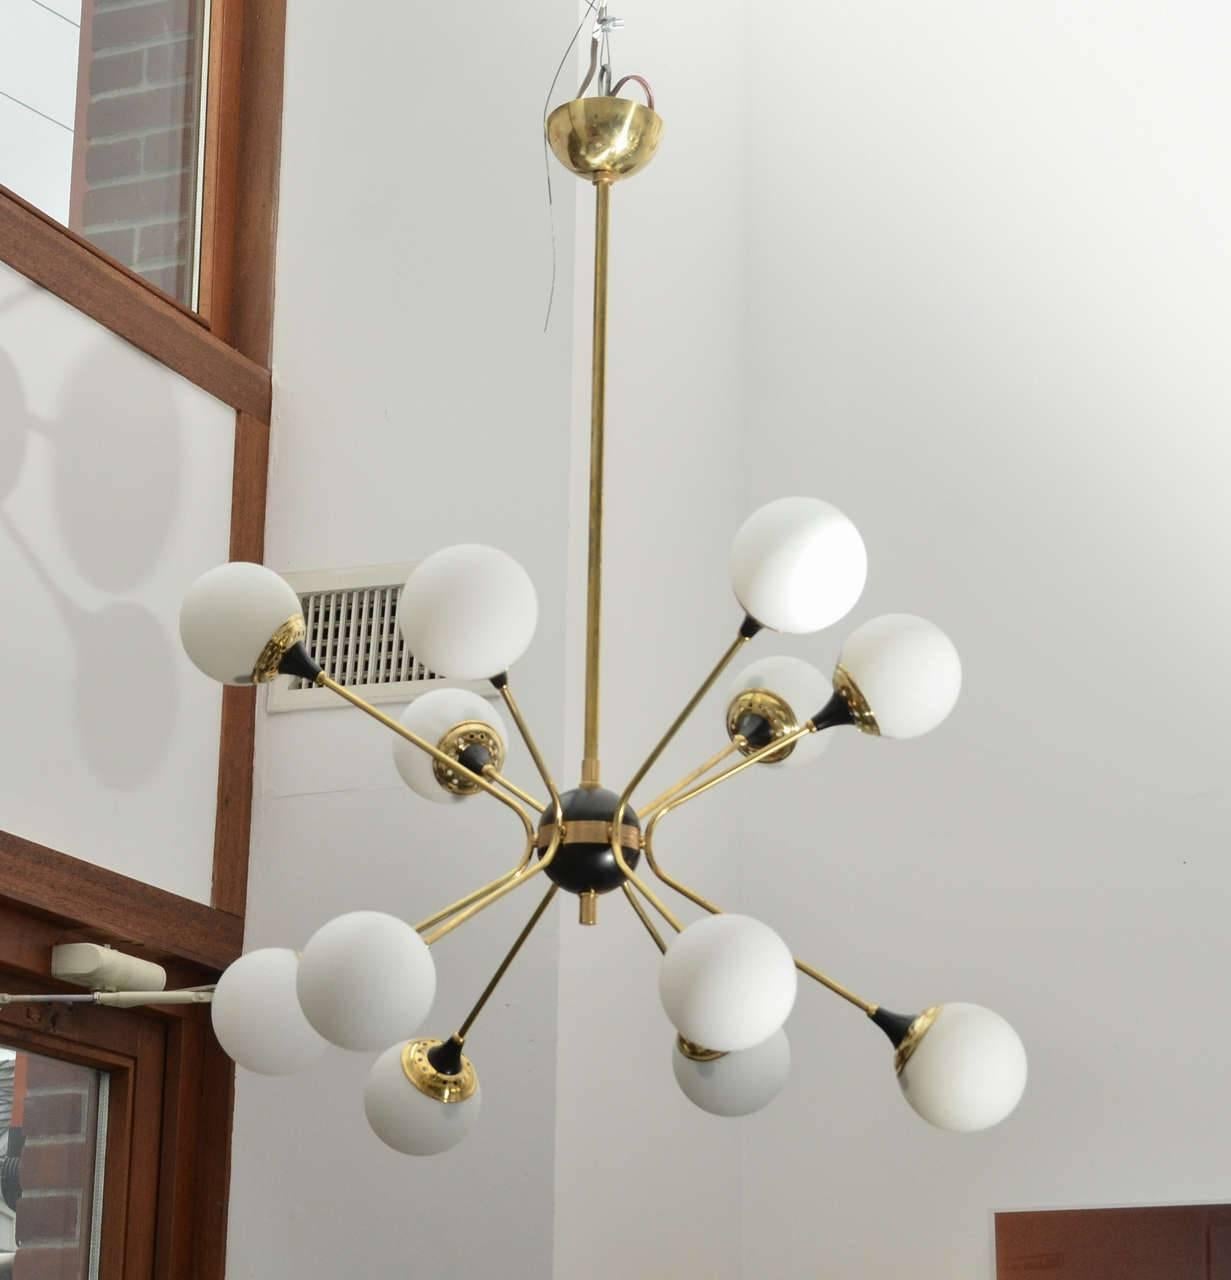 A black round sphere holding six bent brass arms ending with 12 handblown glass shades.